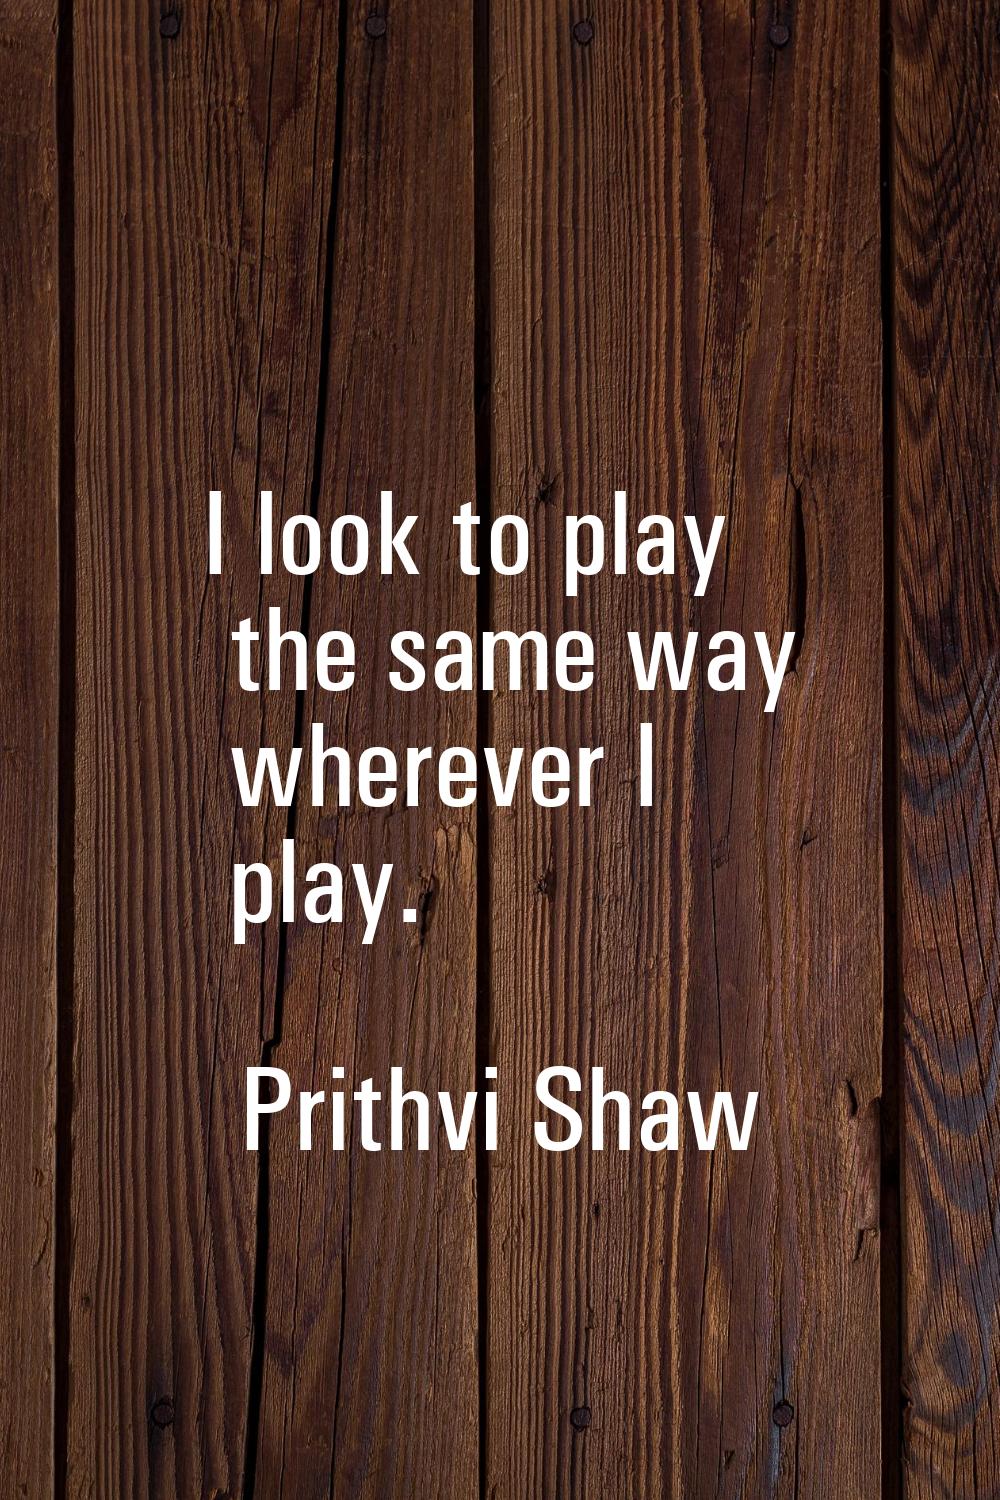 I look to play the same way wherever I play.